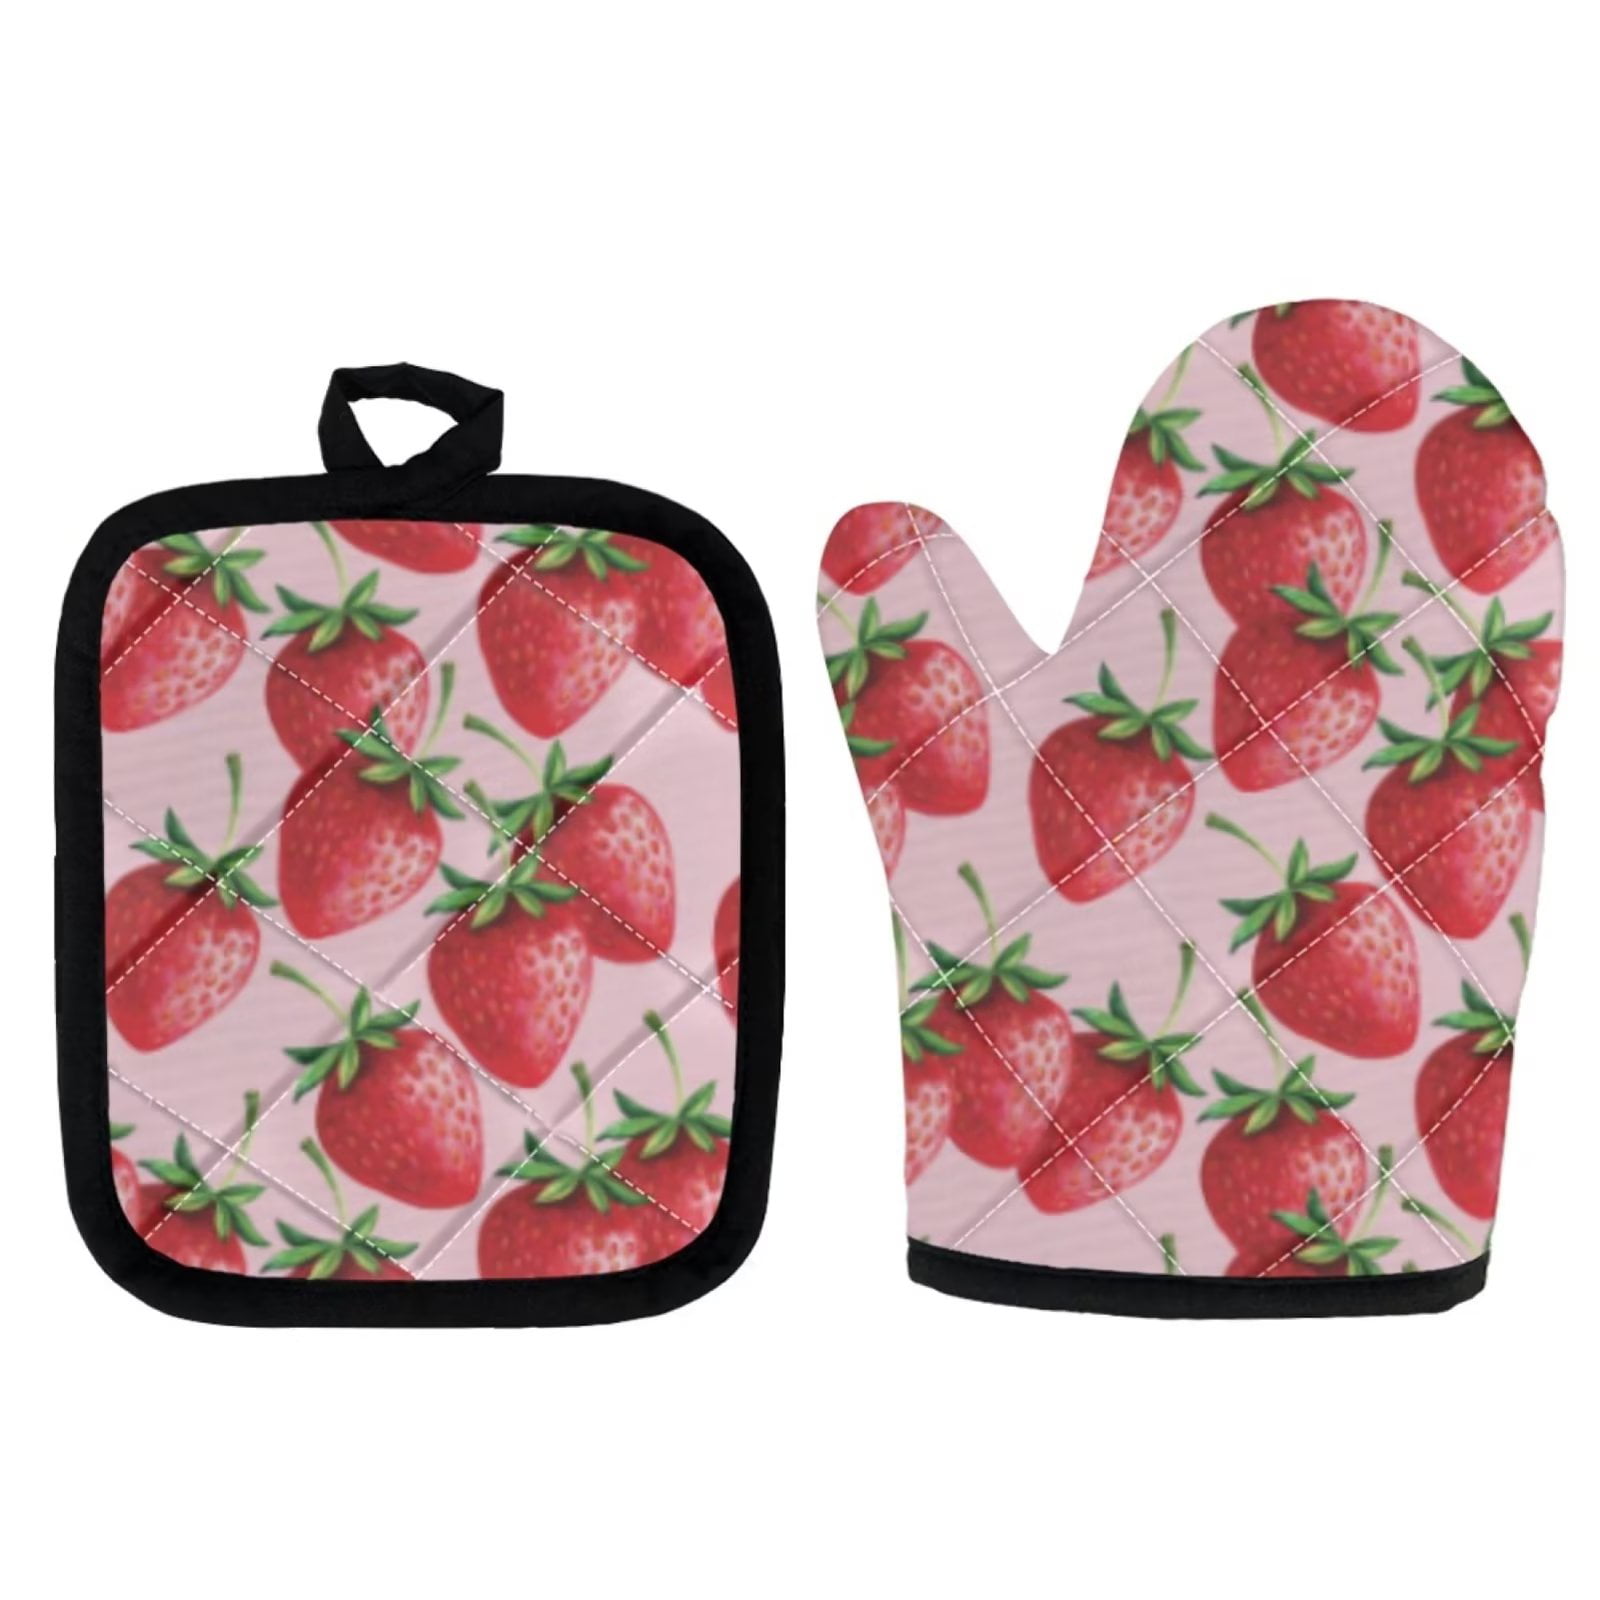 CUP44K Kids' Oven Mitt 12x21 cm Red Pink Cotton Cupcakes Oven Glove